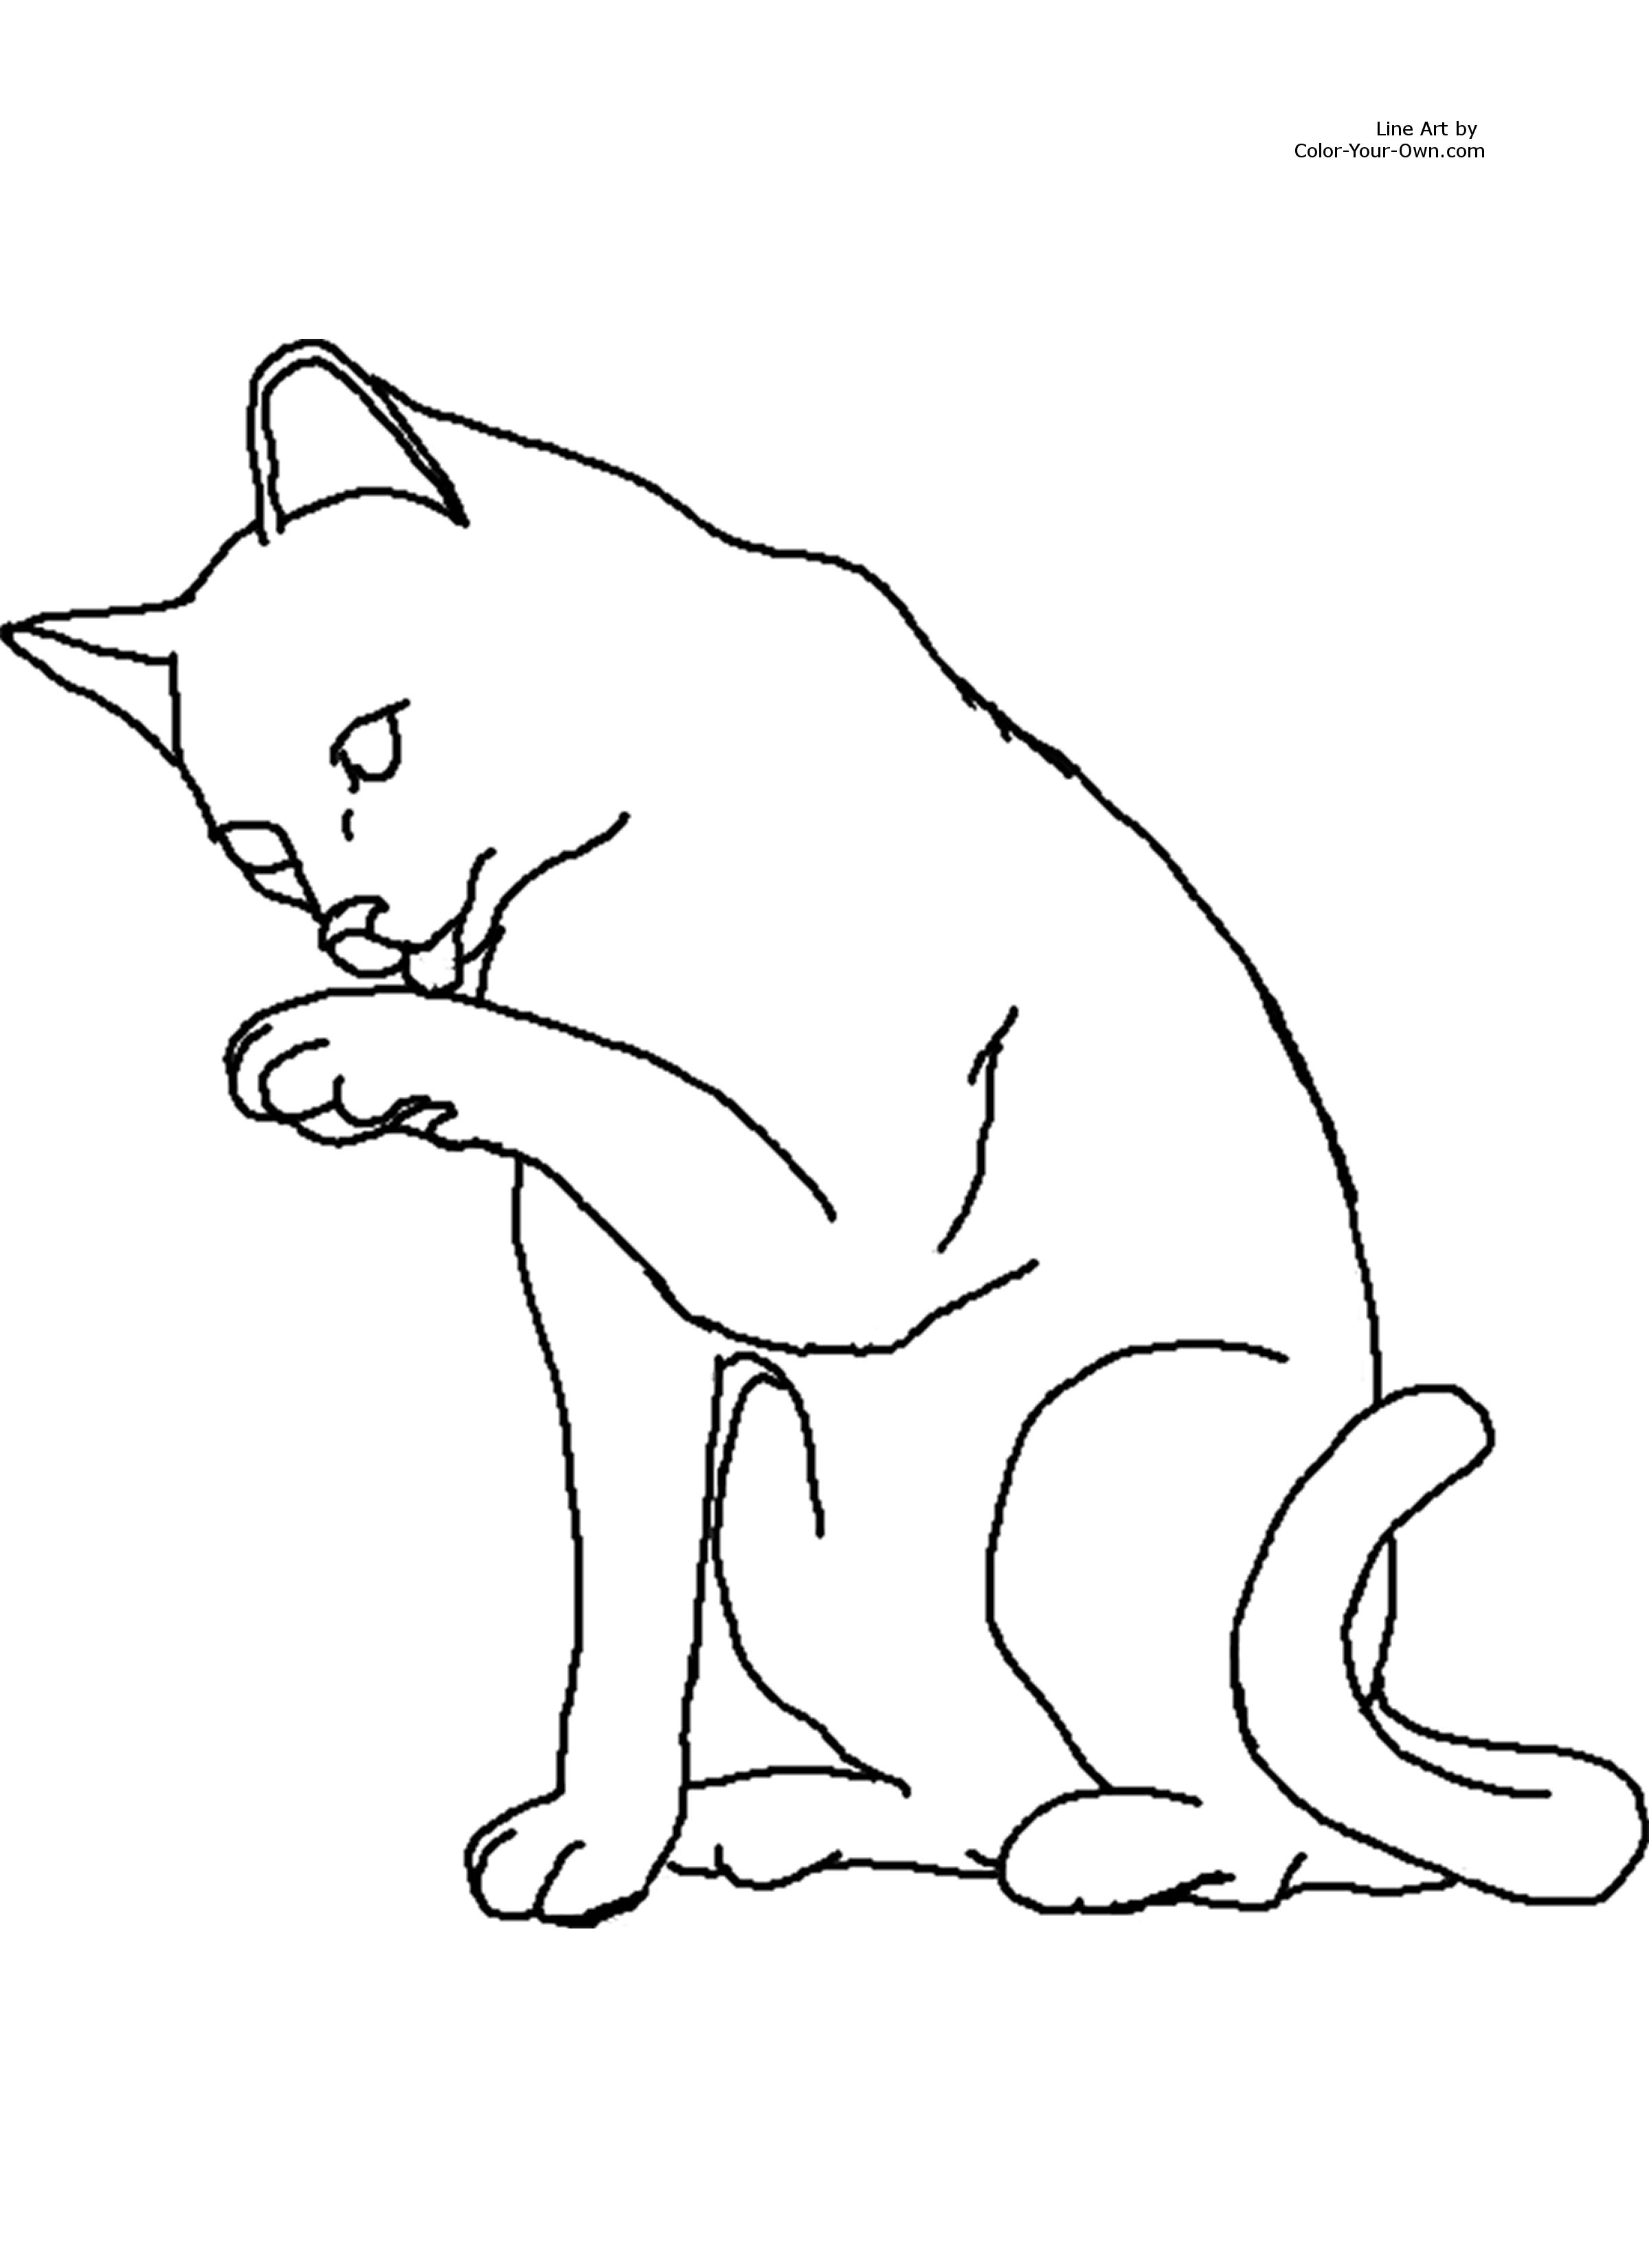 warrior cats couples coloring pages